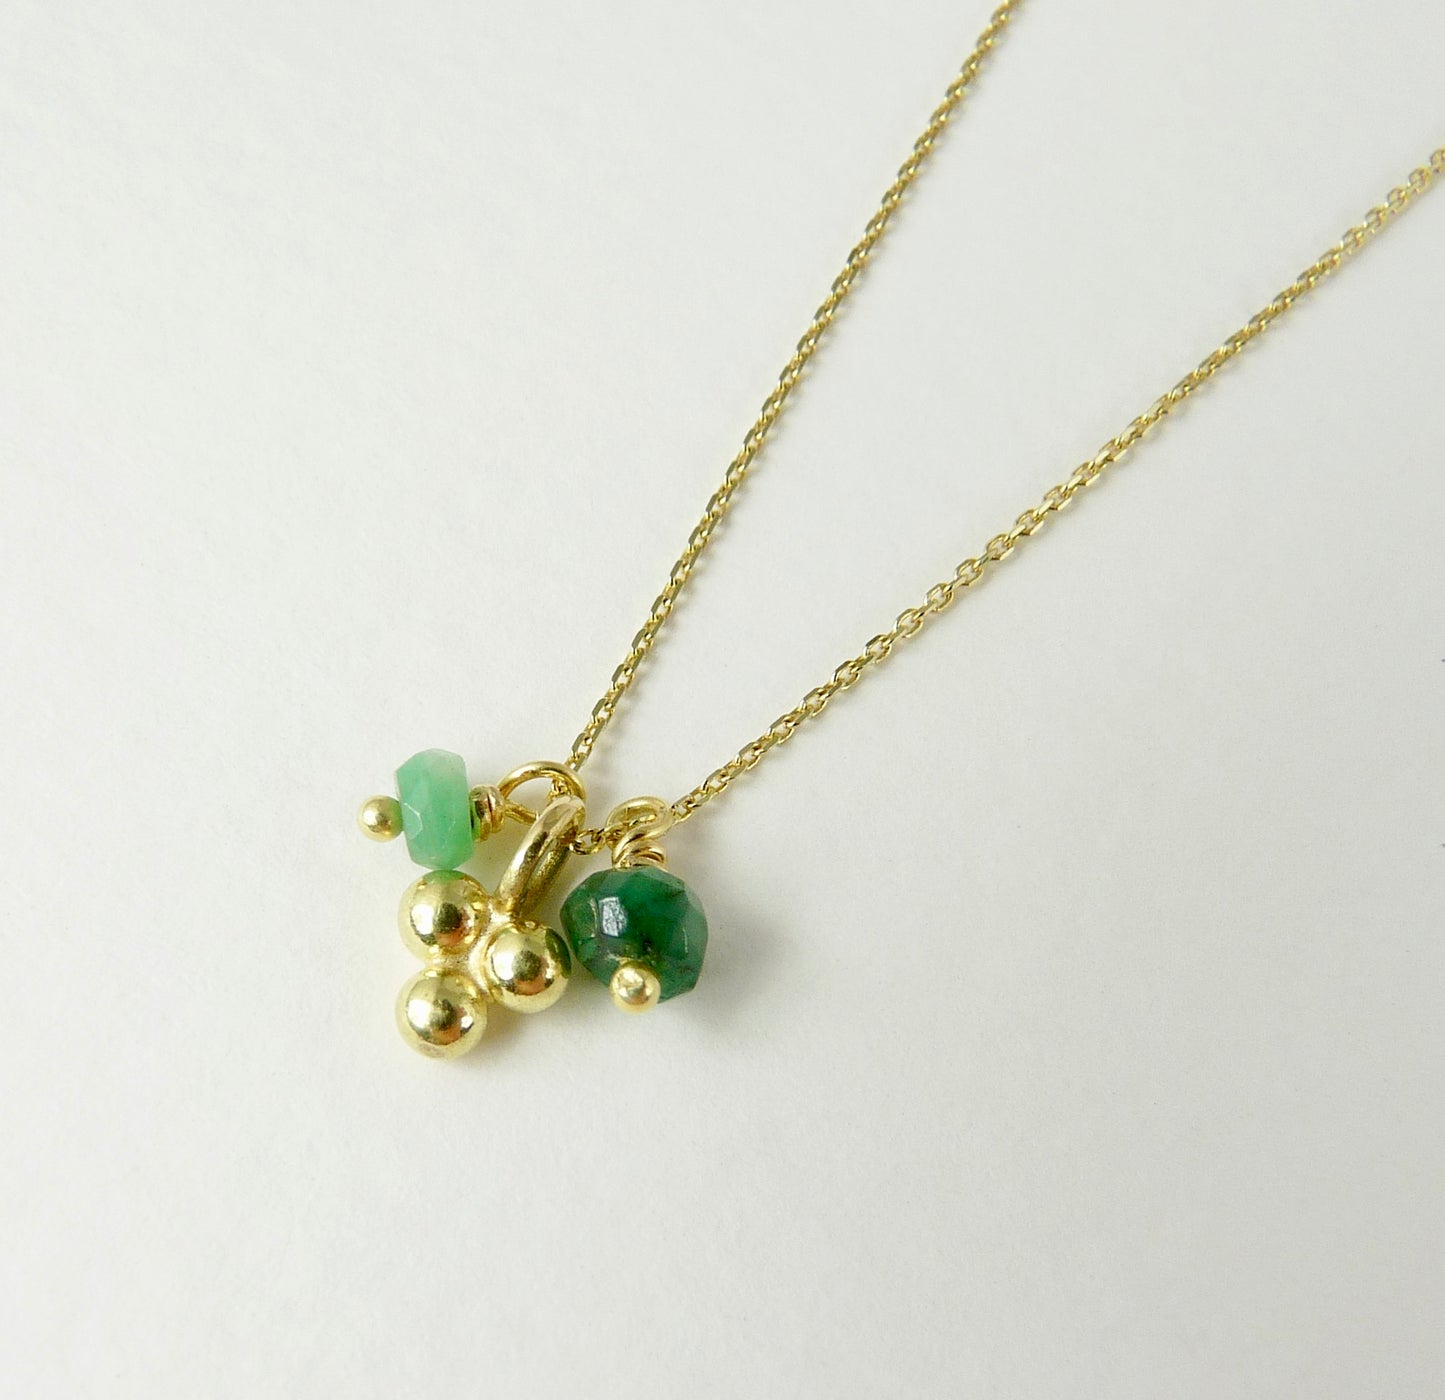 Delicate Granulation Necklace with Emerald